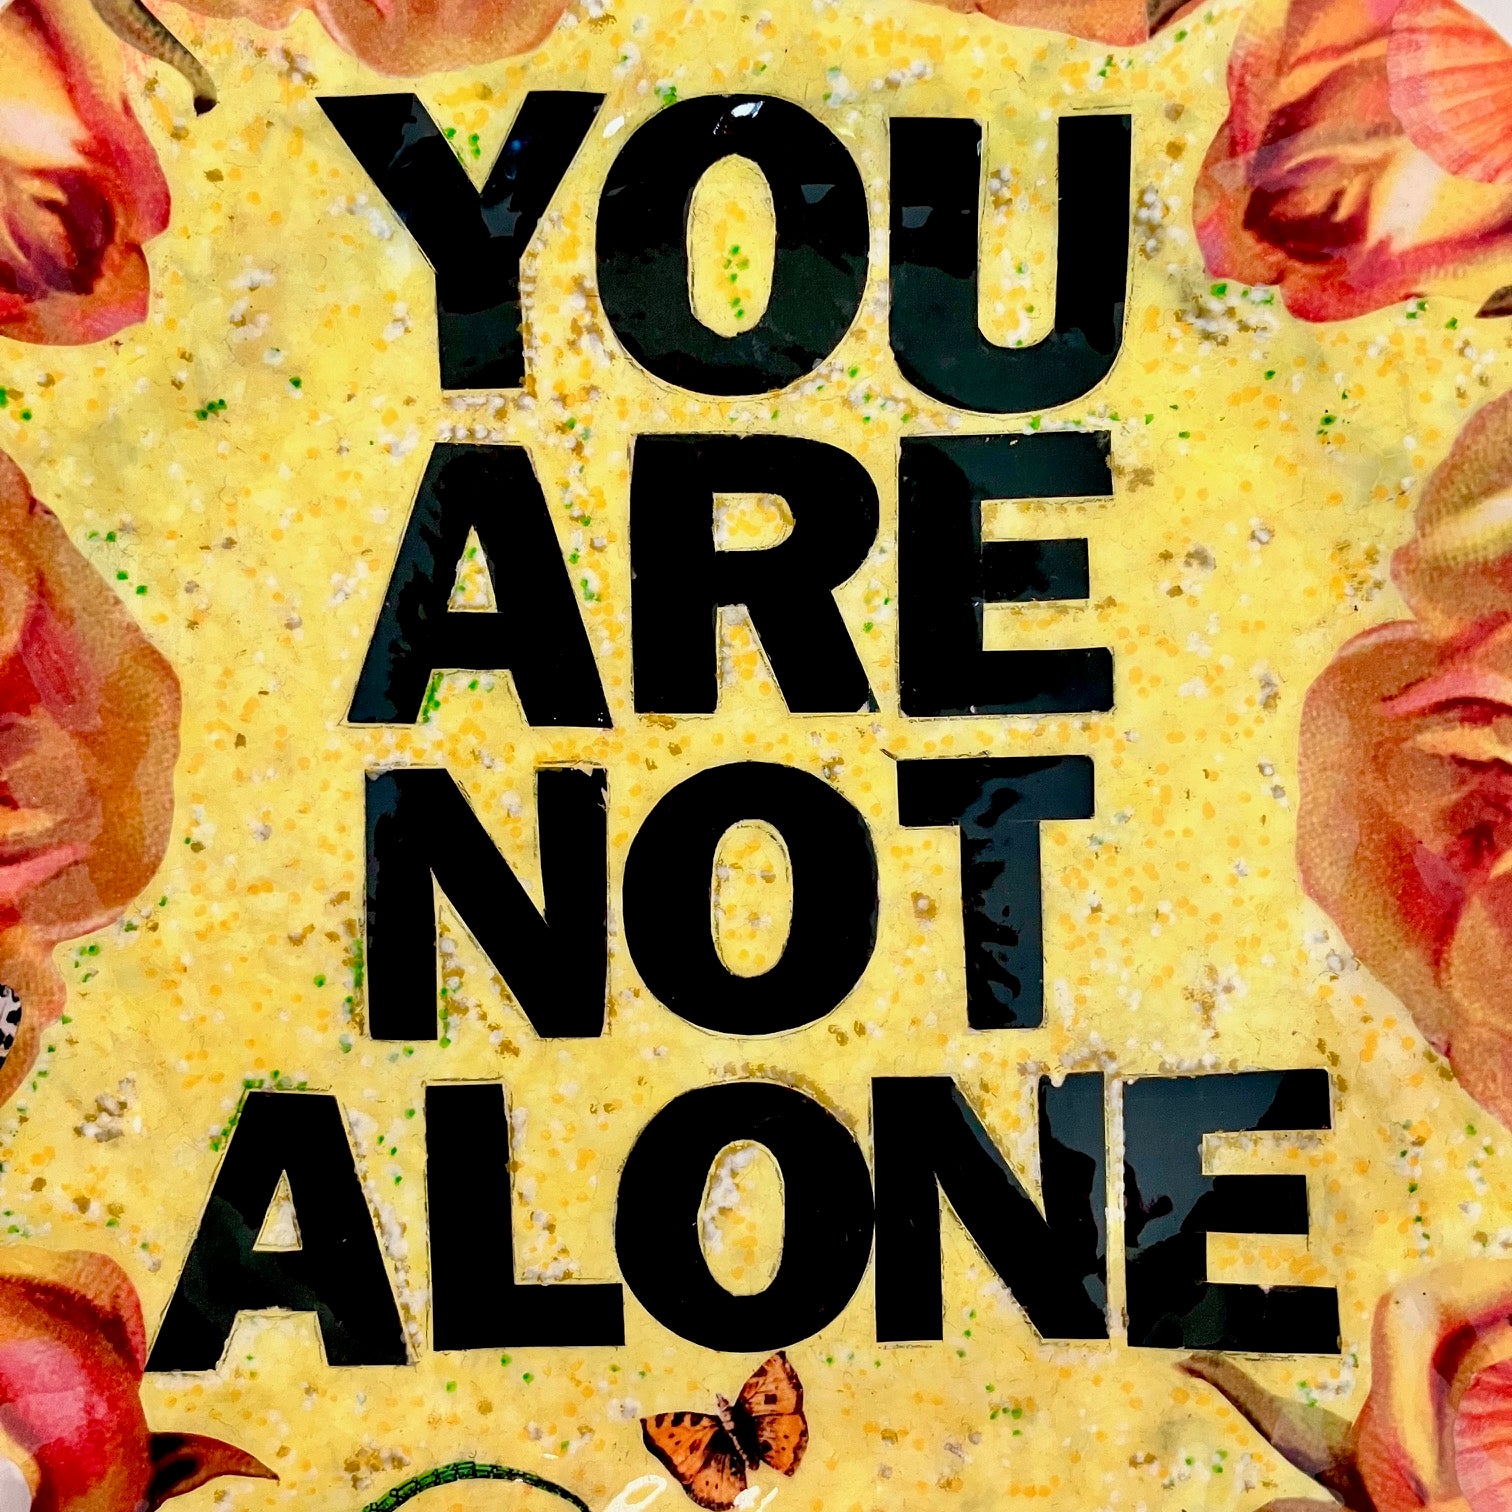 "You Are Not Alone" one-of-a-kind collage artwork Wall Plate by House of Frisson. Featuring the words "You Are Not Alone" framed by roses, pearls, and moths, on a yellow background. Closeup details.